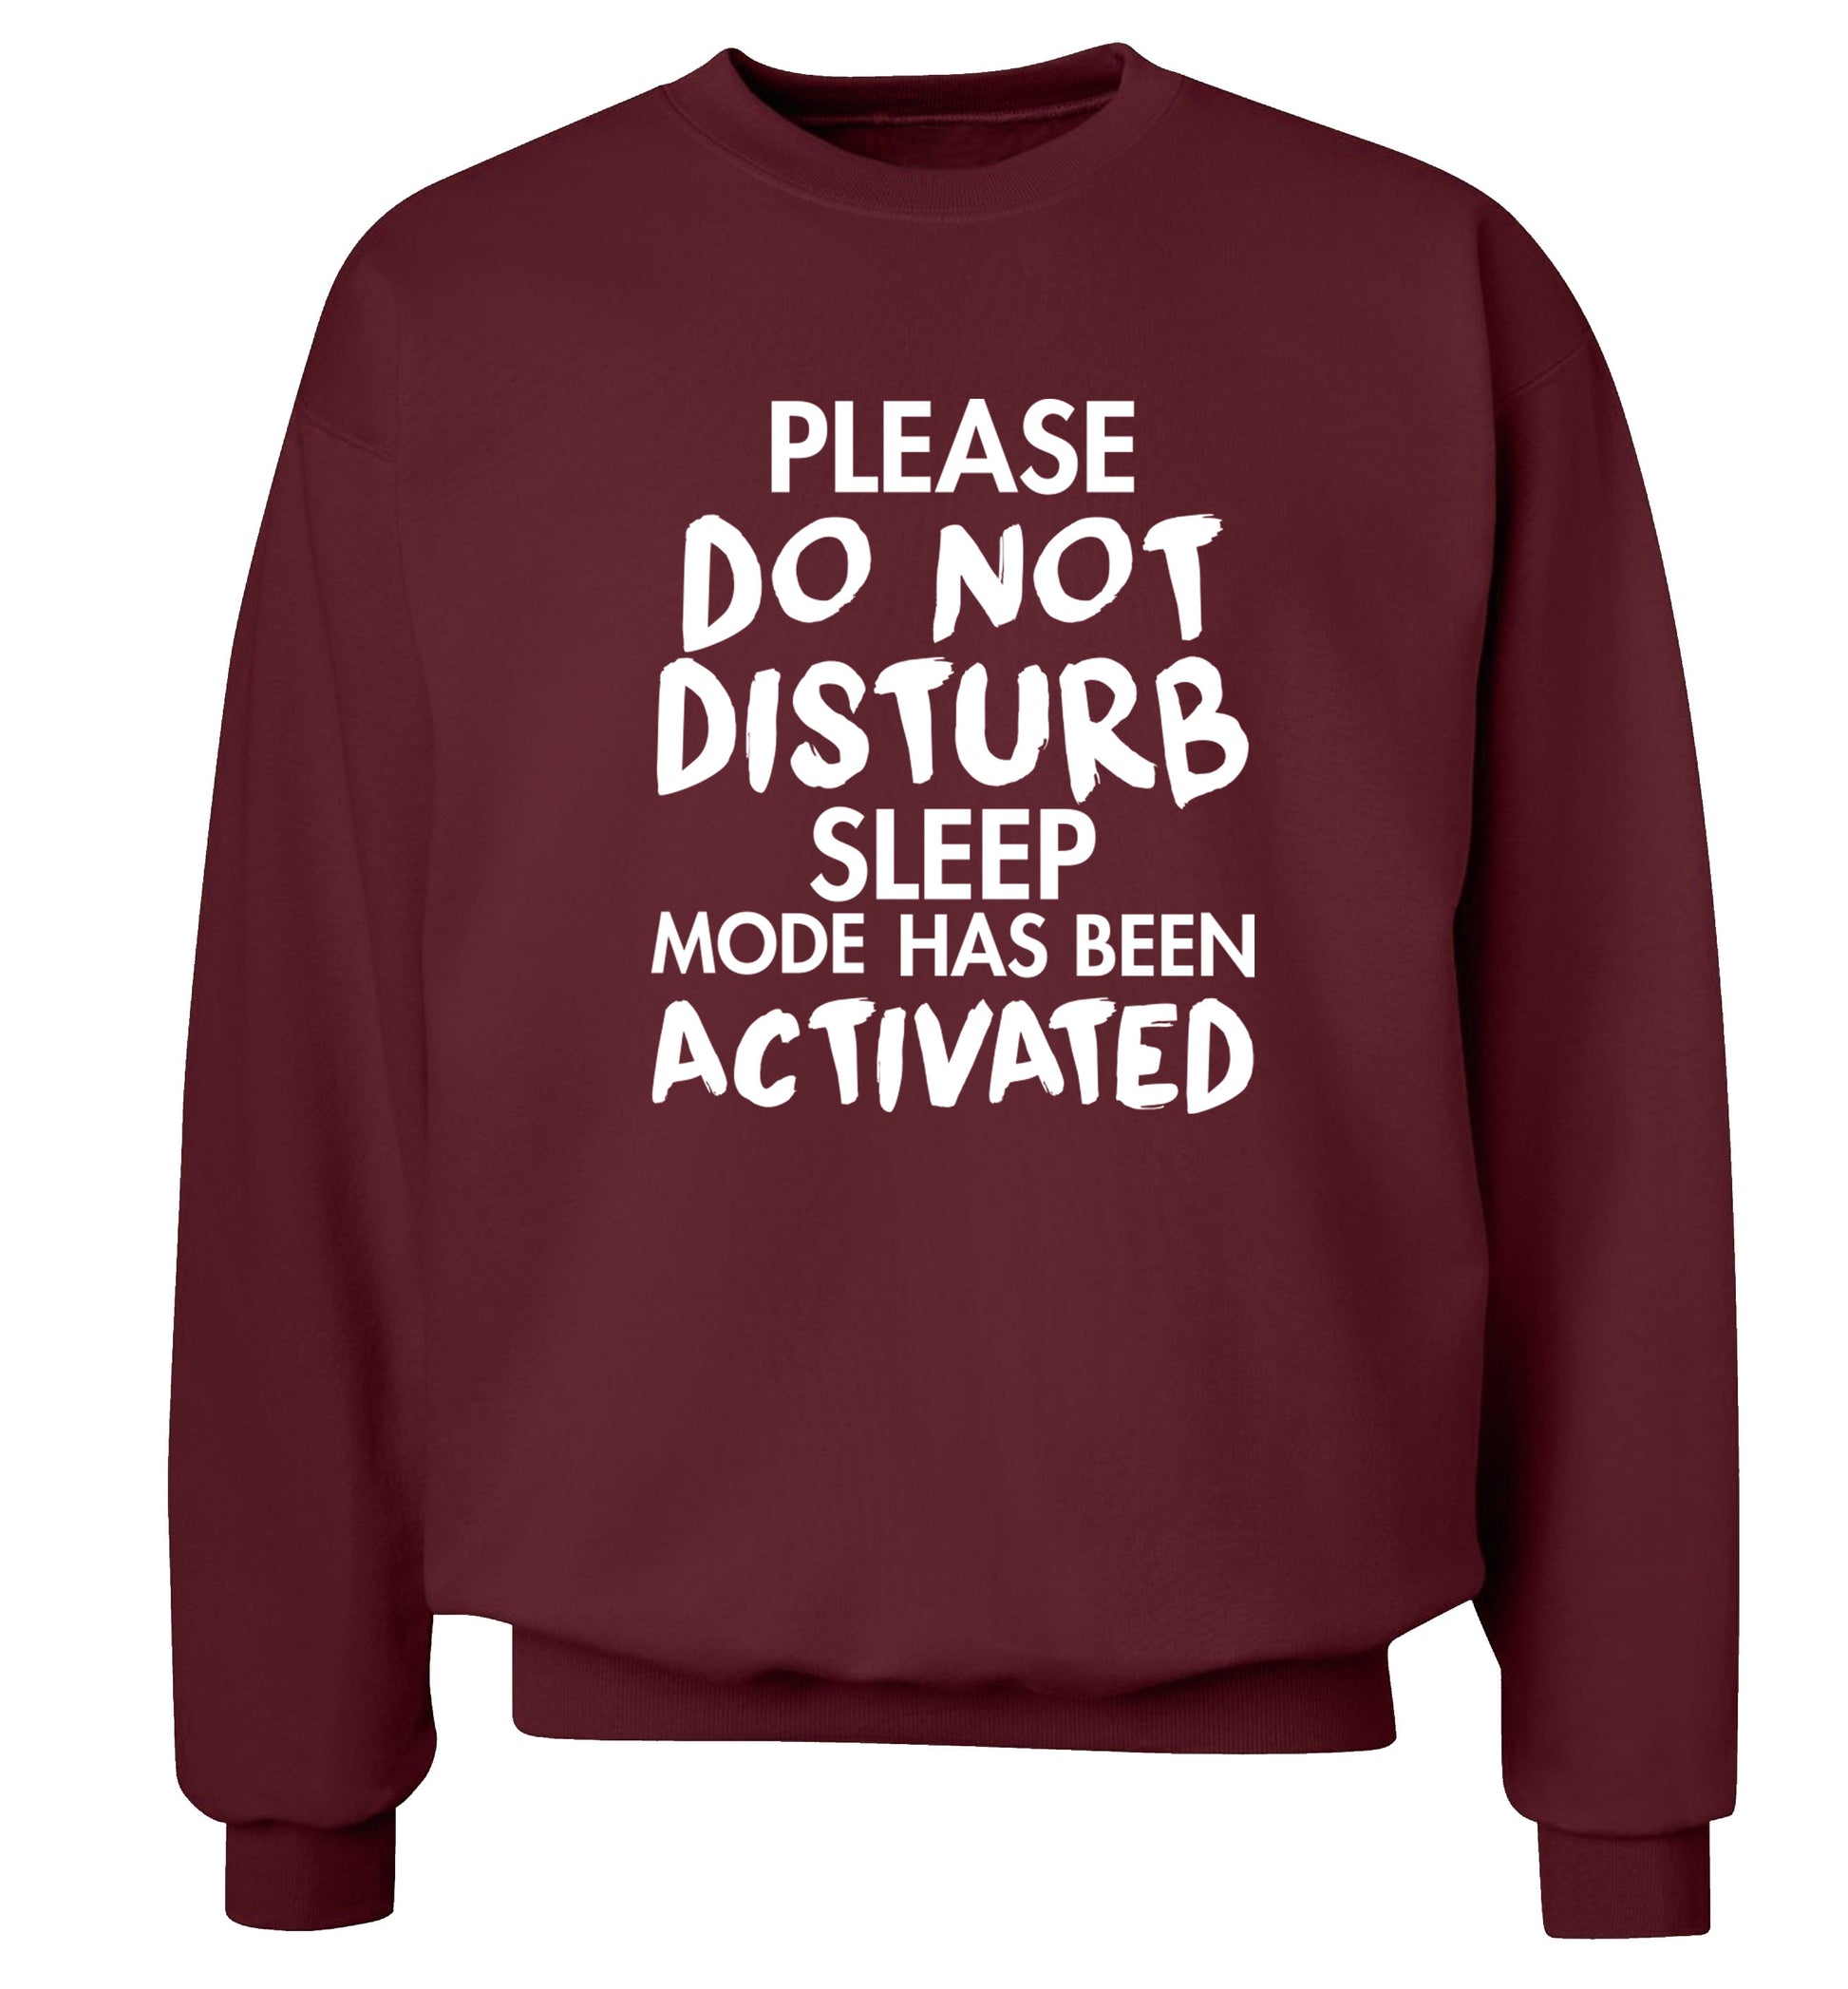 Please do not disturb sleeping mode has been activated Adult's unisex maroon Sweater 2XL